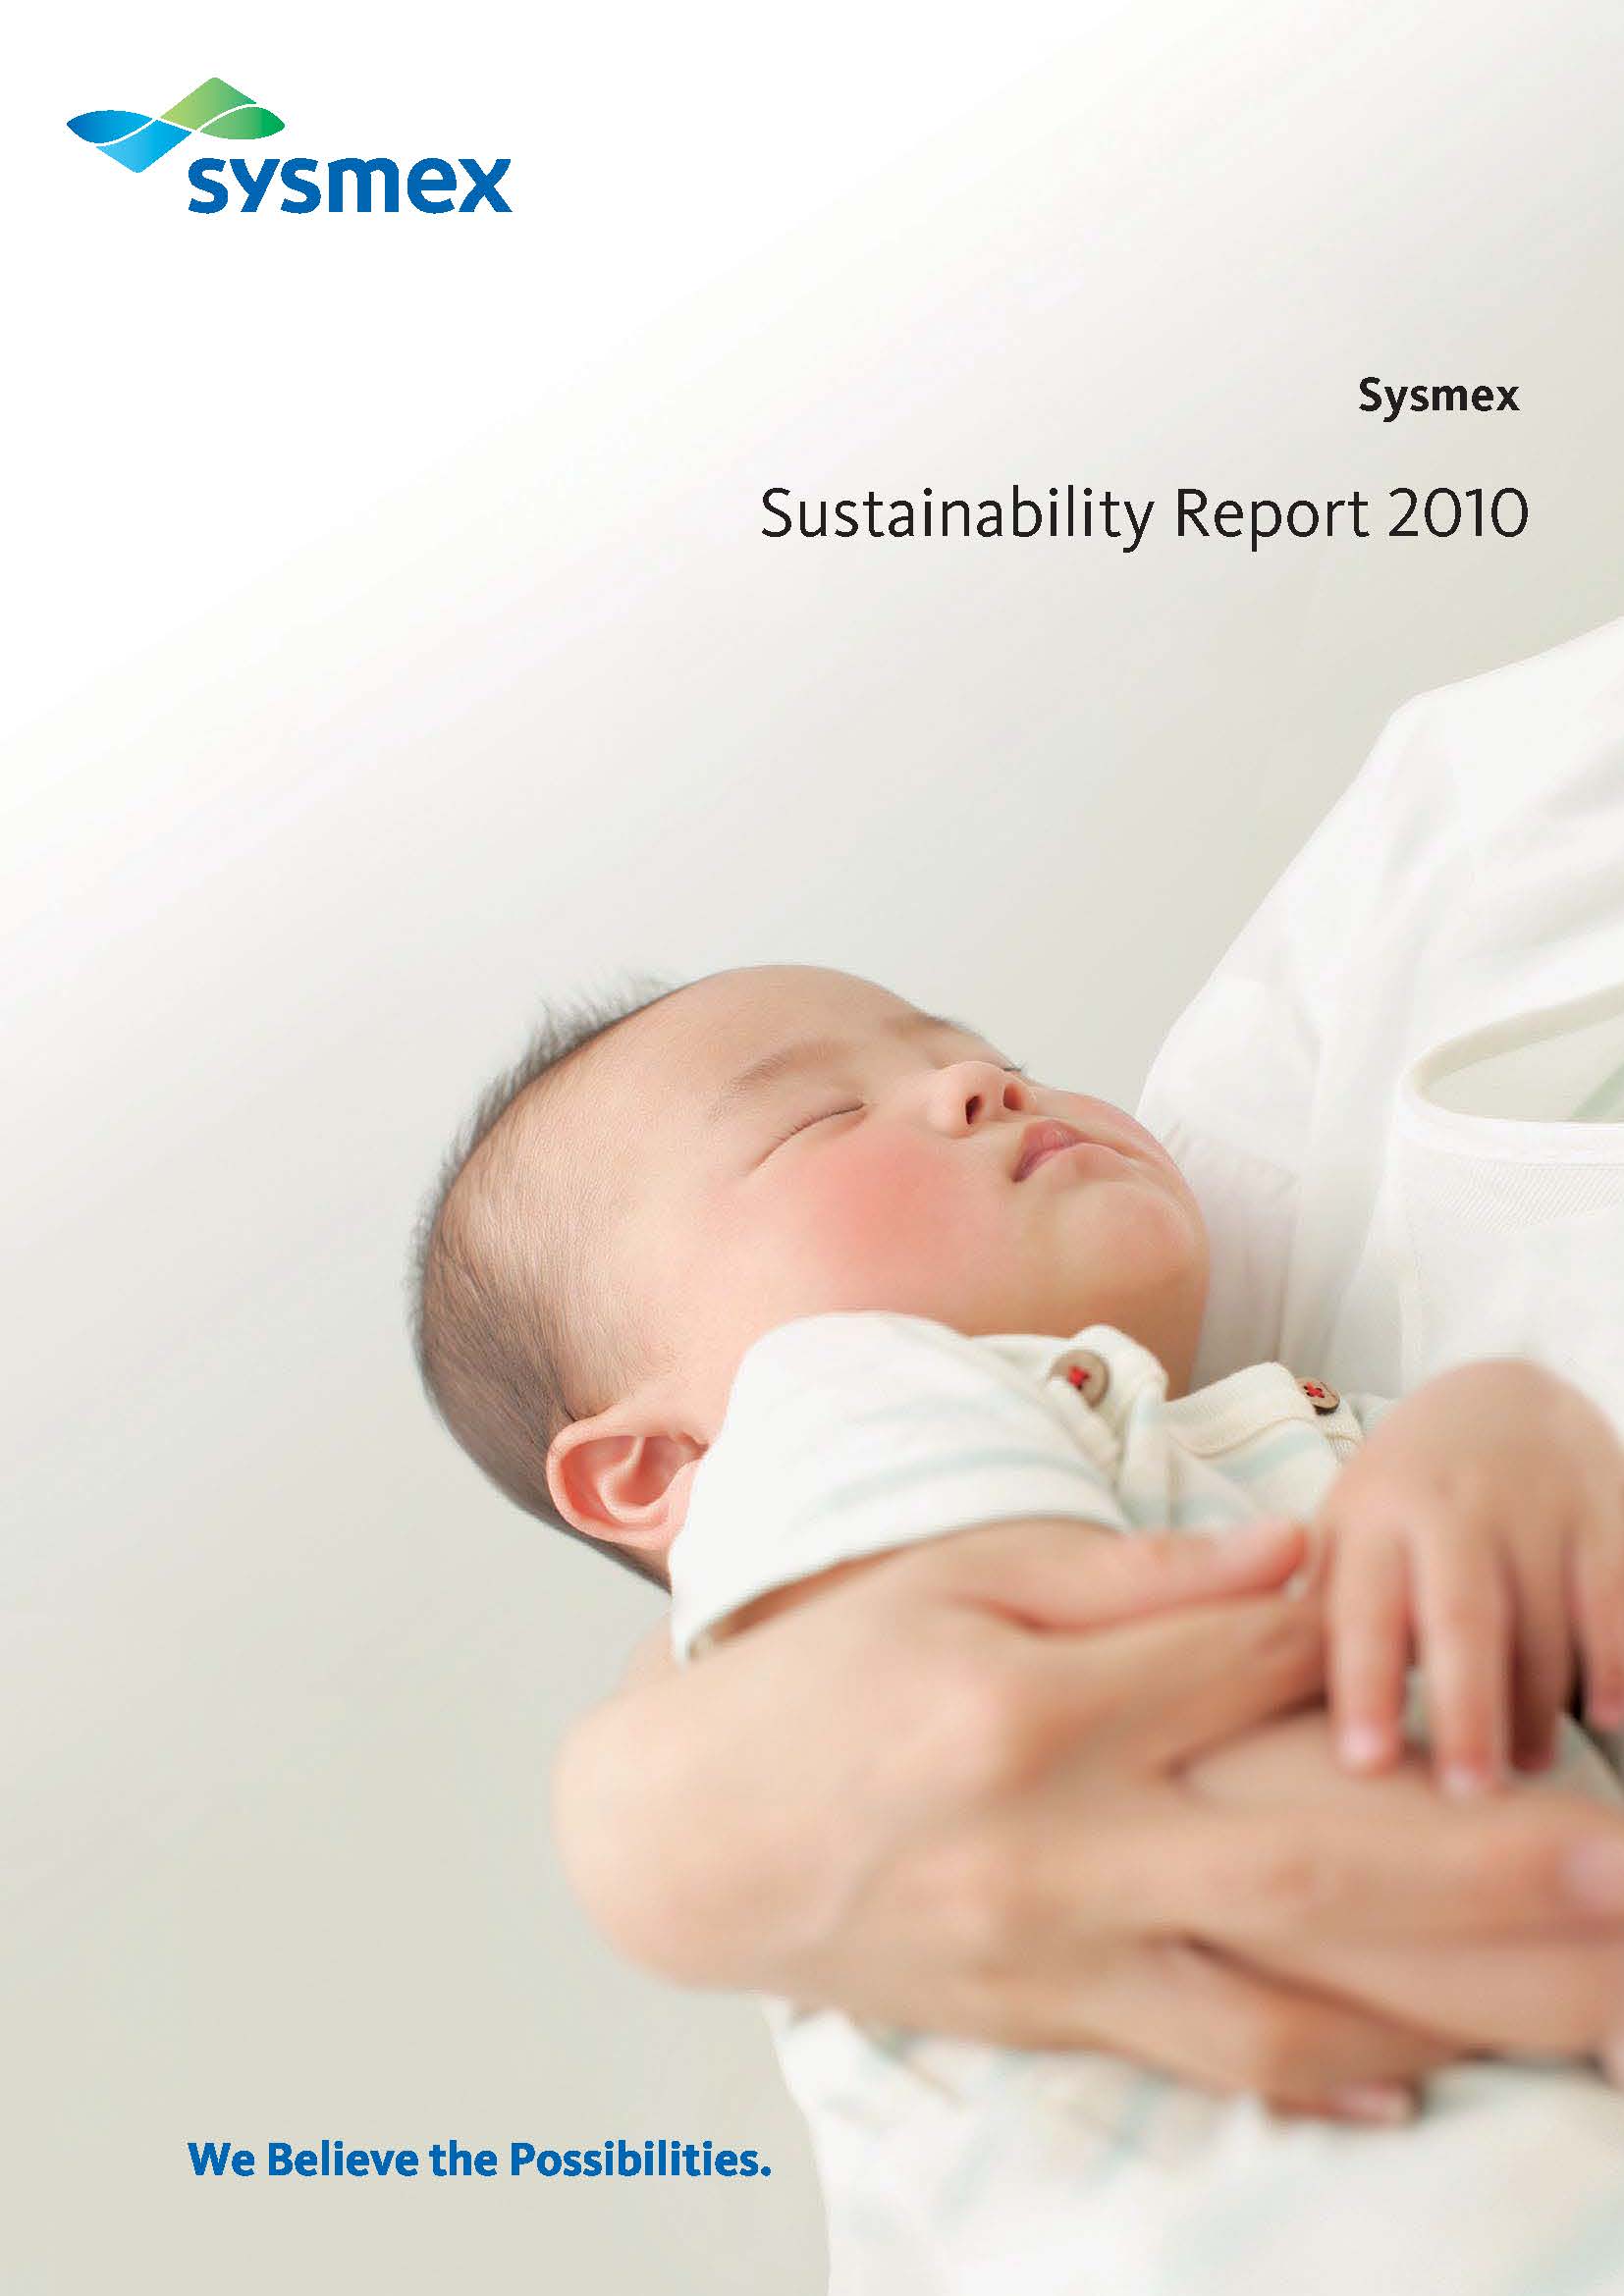 Sysmex Sustainability Report 2010